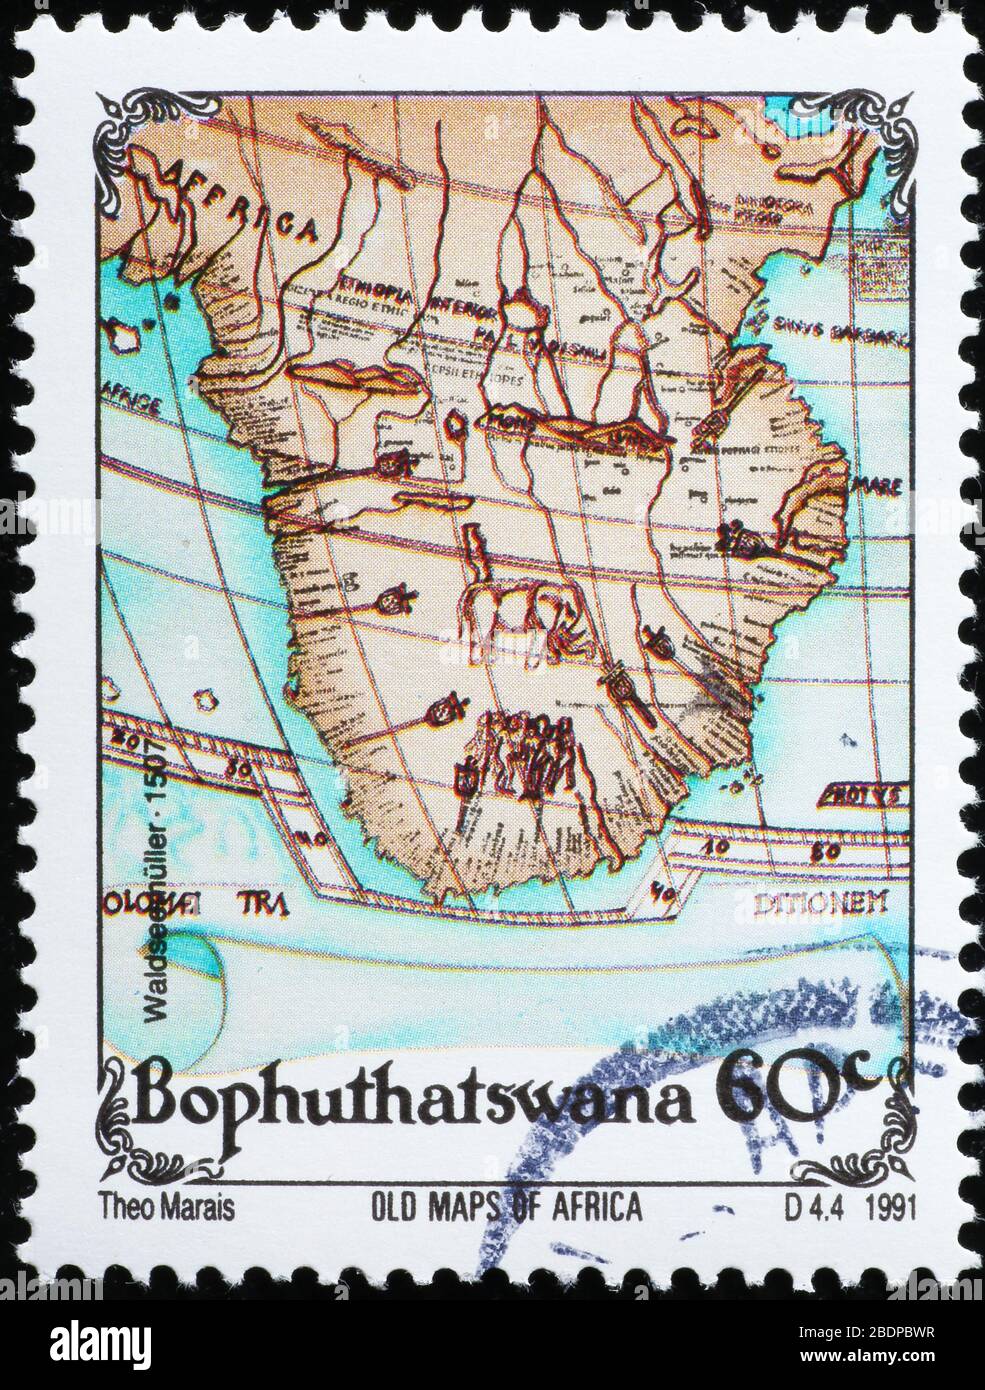 Antique map of southern Africa on postage stamp Stock Photo